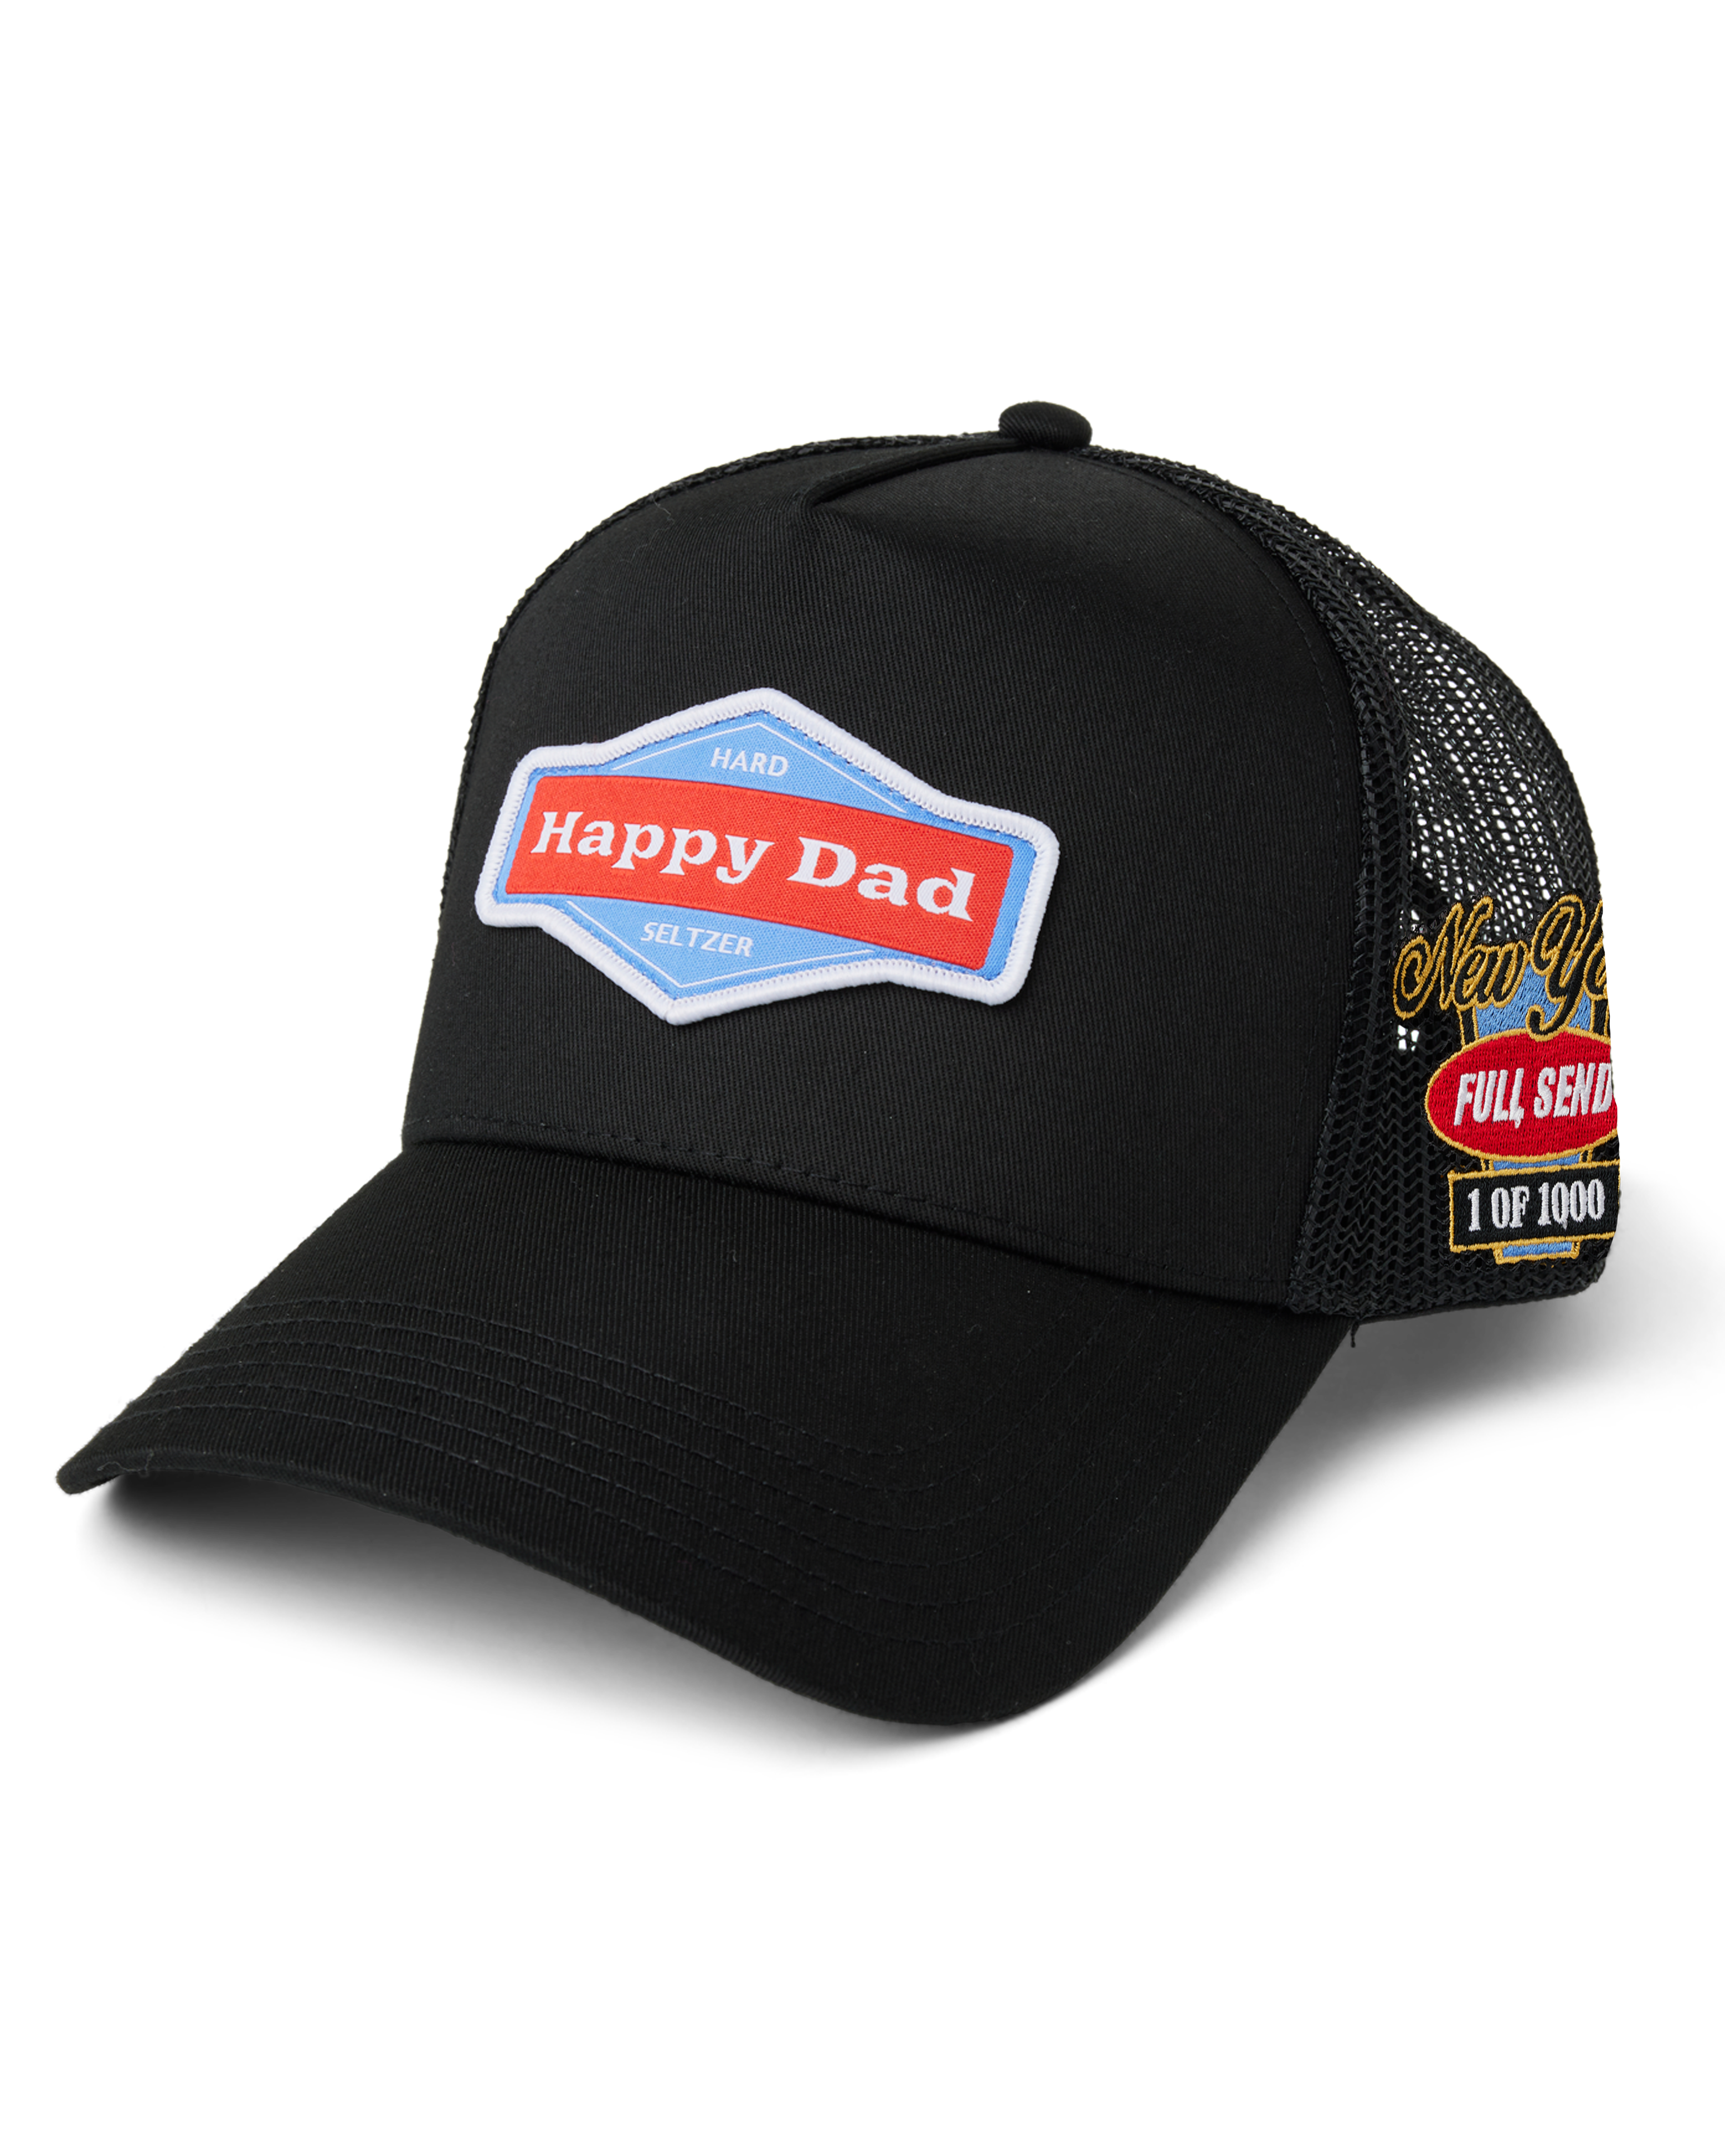 (Limited) New York - Happy Dad State Trucker Hat 1 of 1000